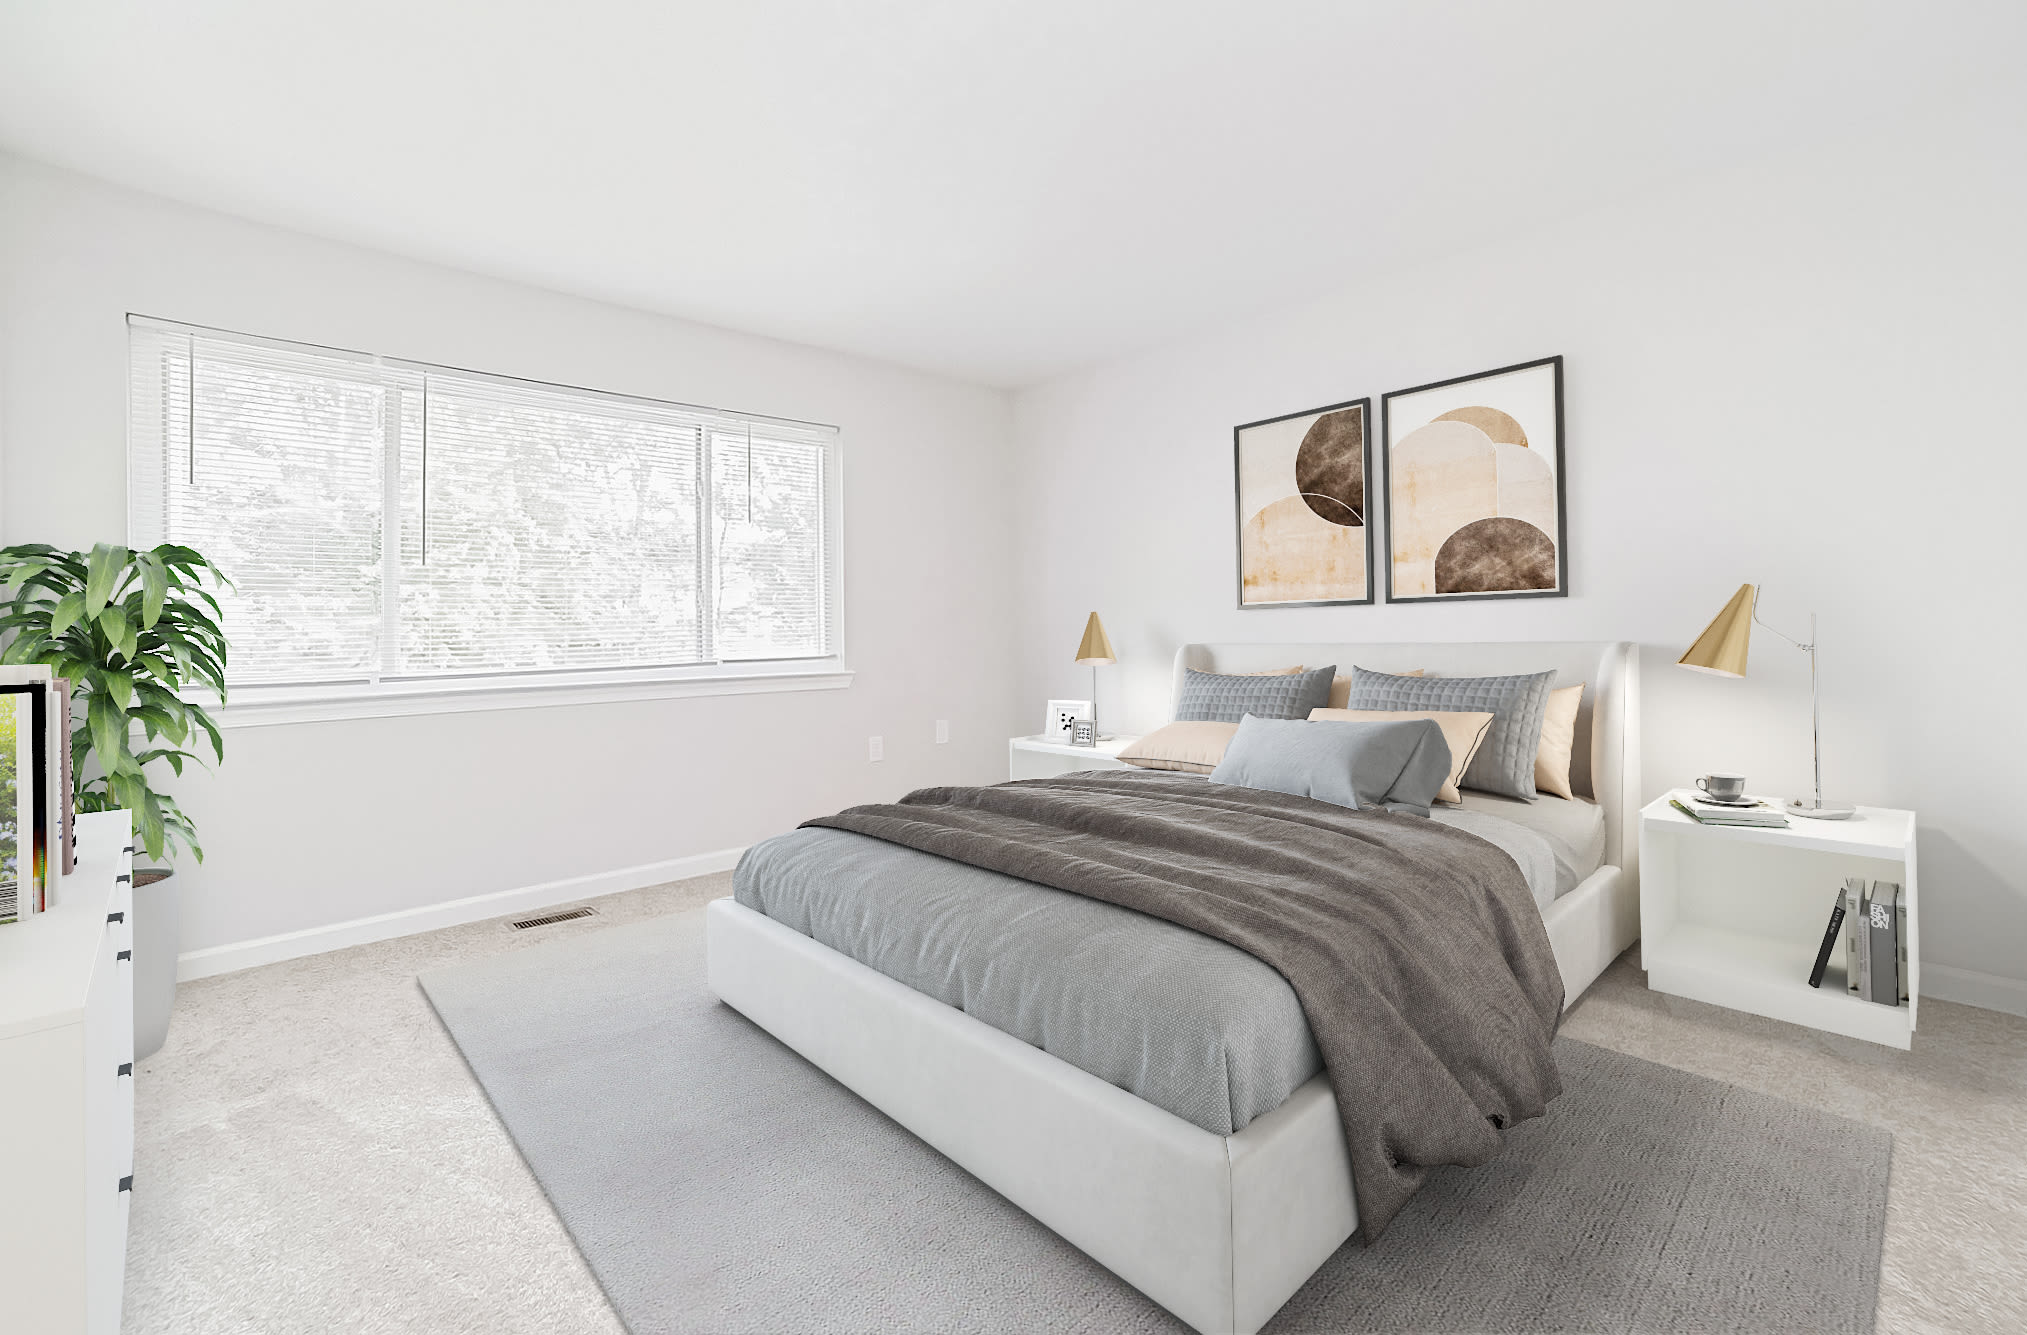 Bedroom with windows at Beacon Pointe Apartments & Townhomes in Sparrows Point, Maryland